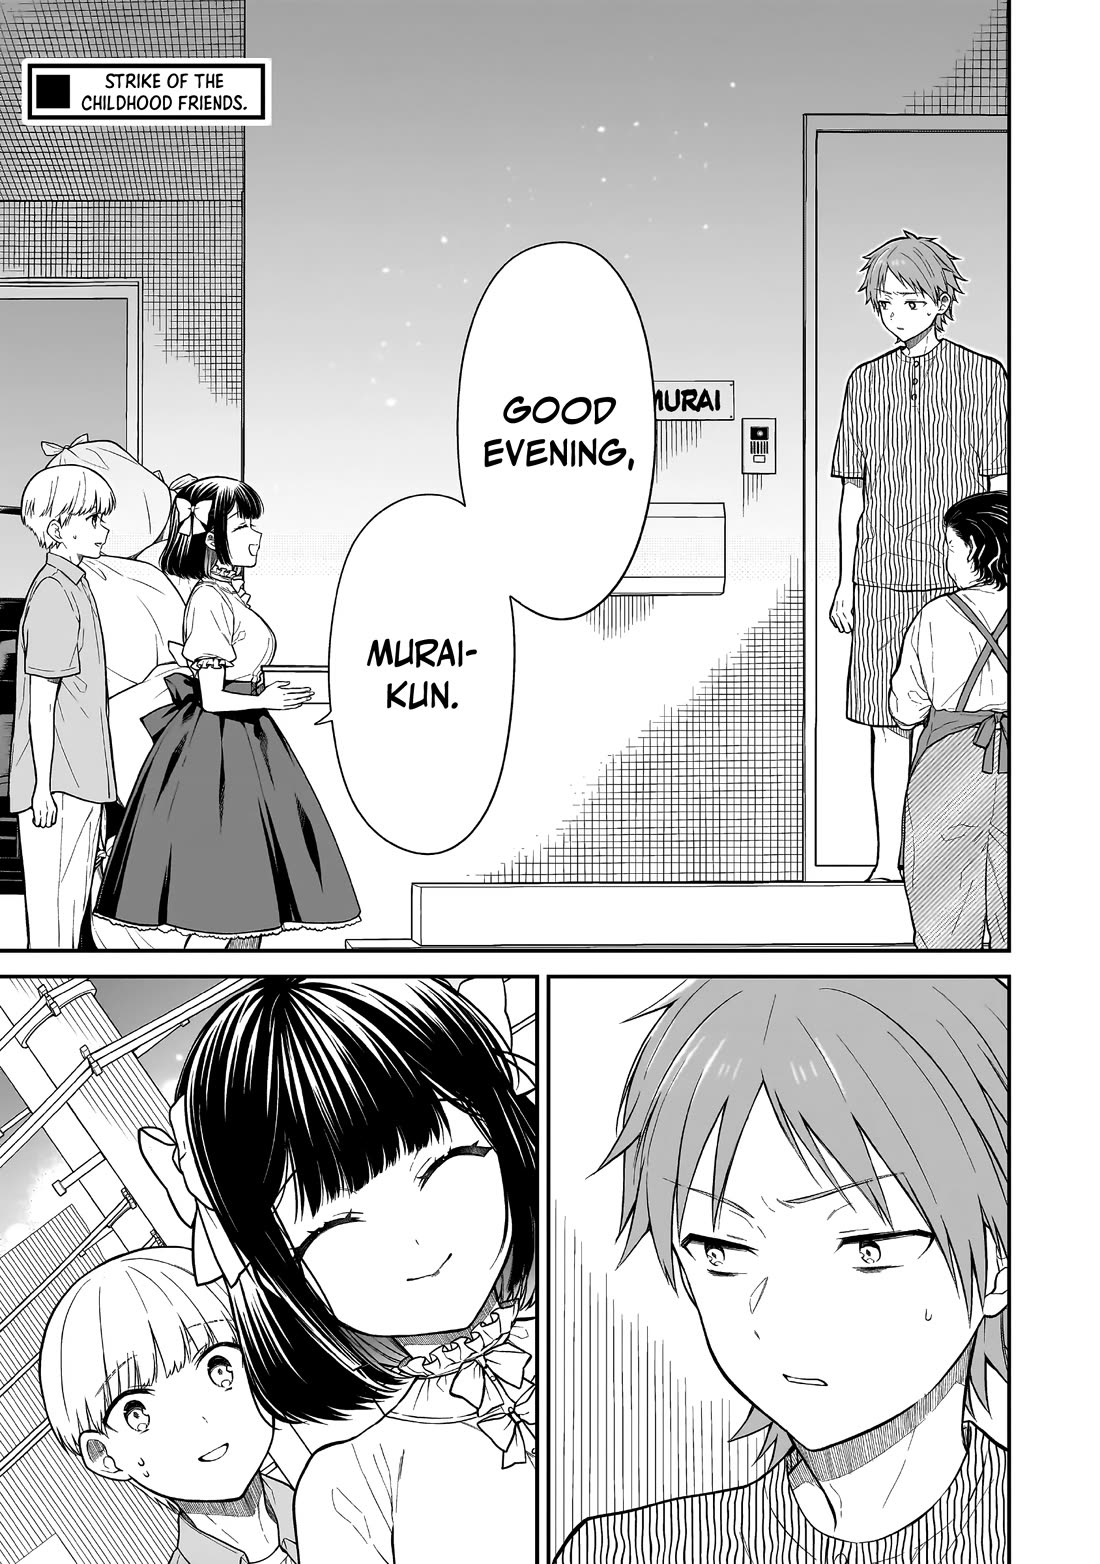 Miyu-chan Will Always Be Your Friend - chapter 4 - #2